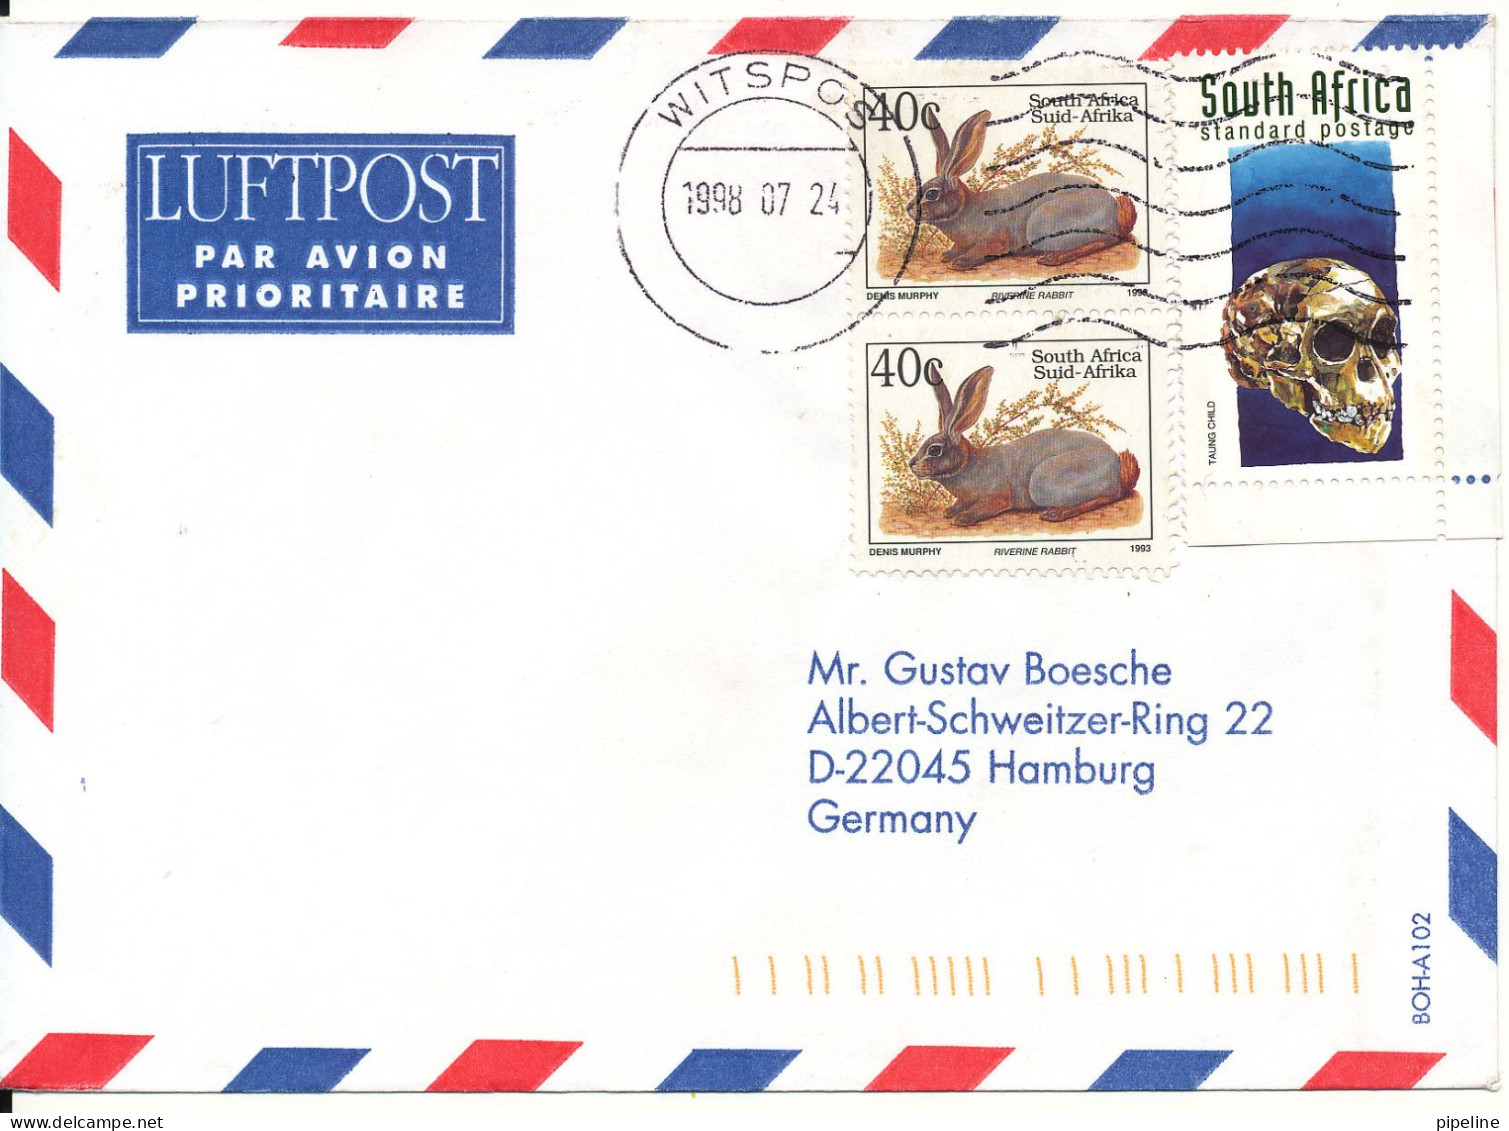 South Africa Air Mail Cover Sent To Germany 24-7-1998 - Luchtpost